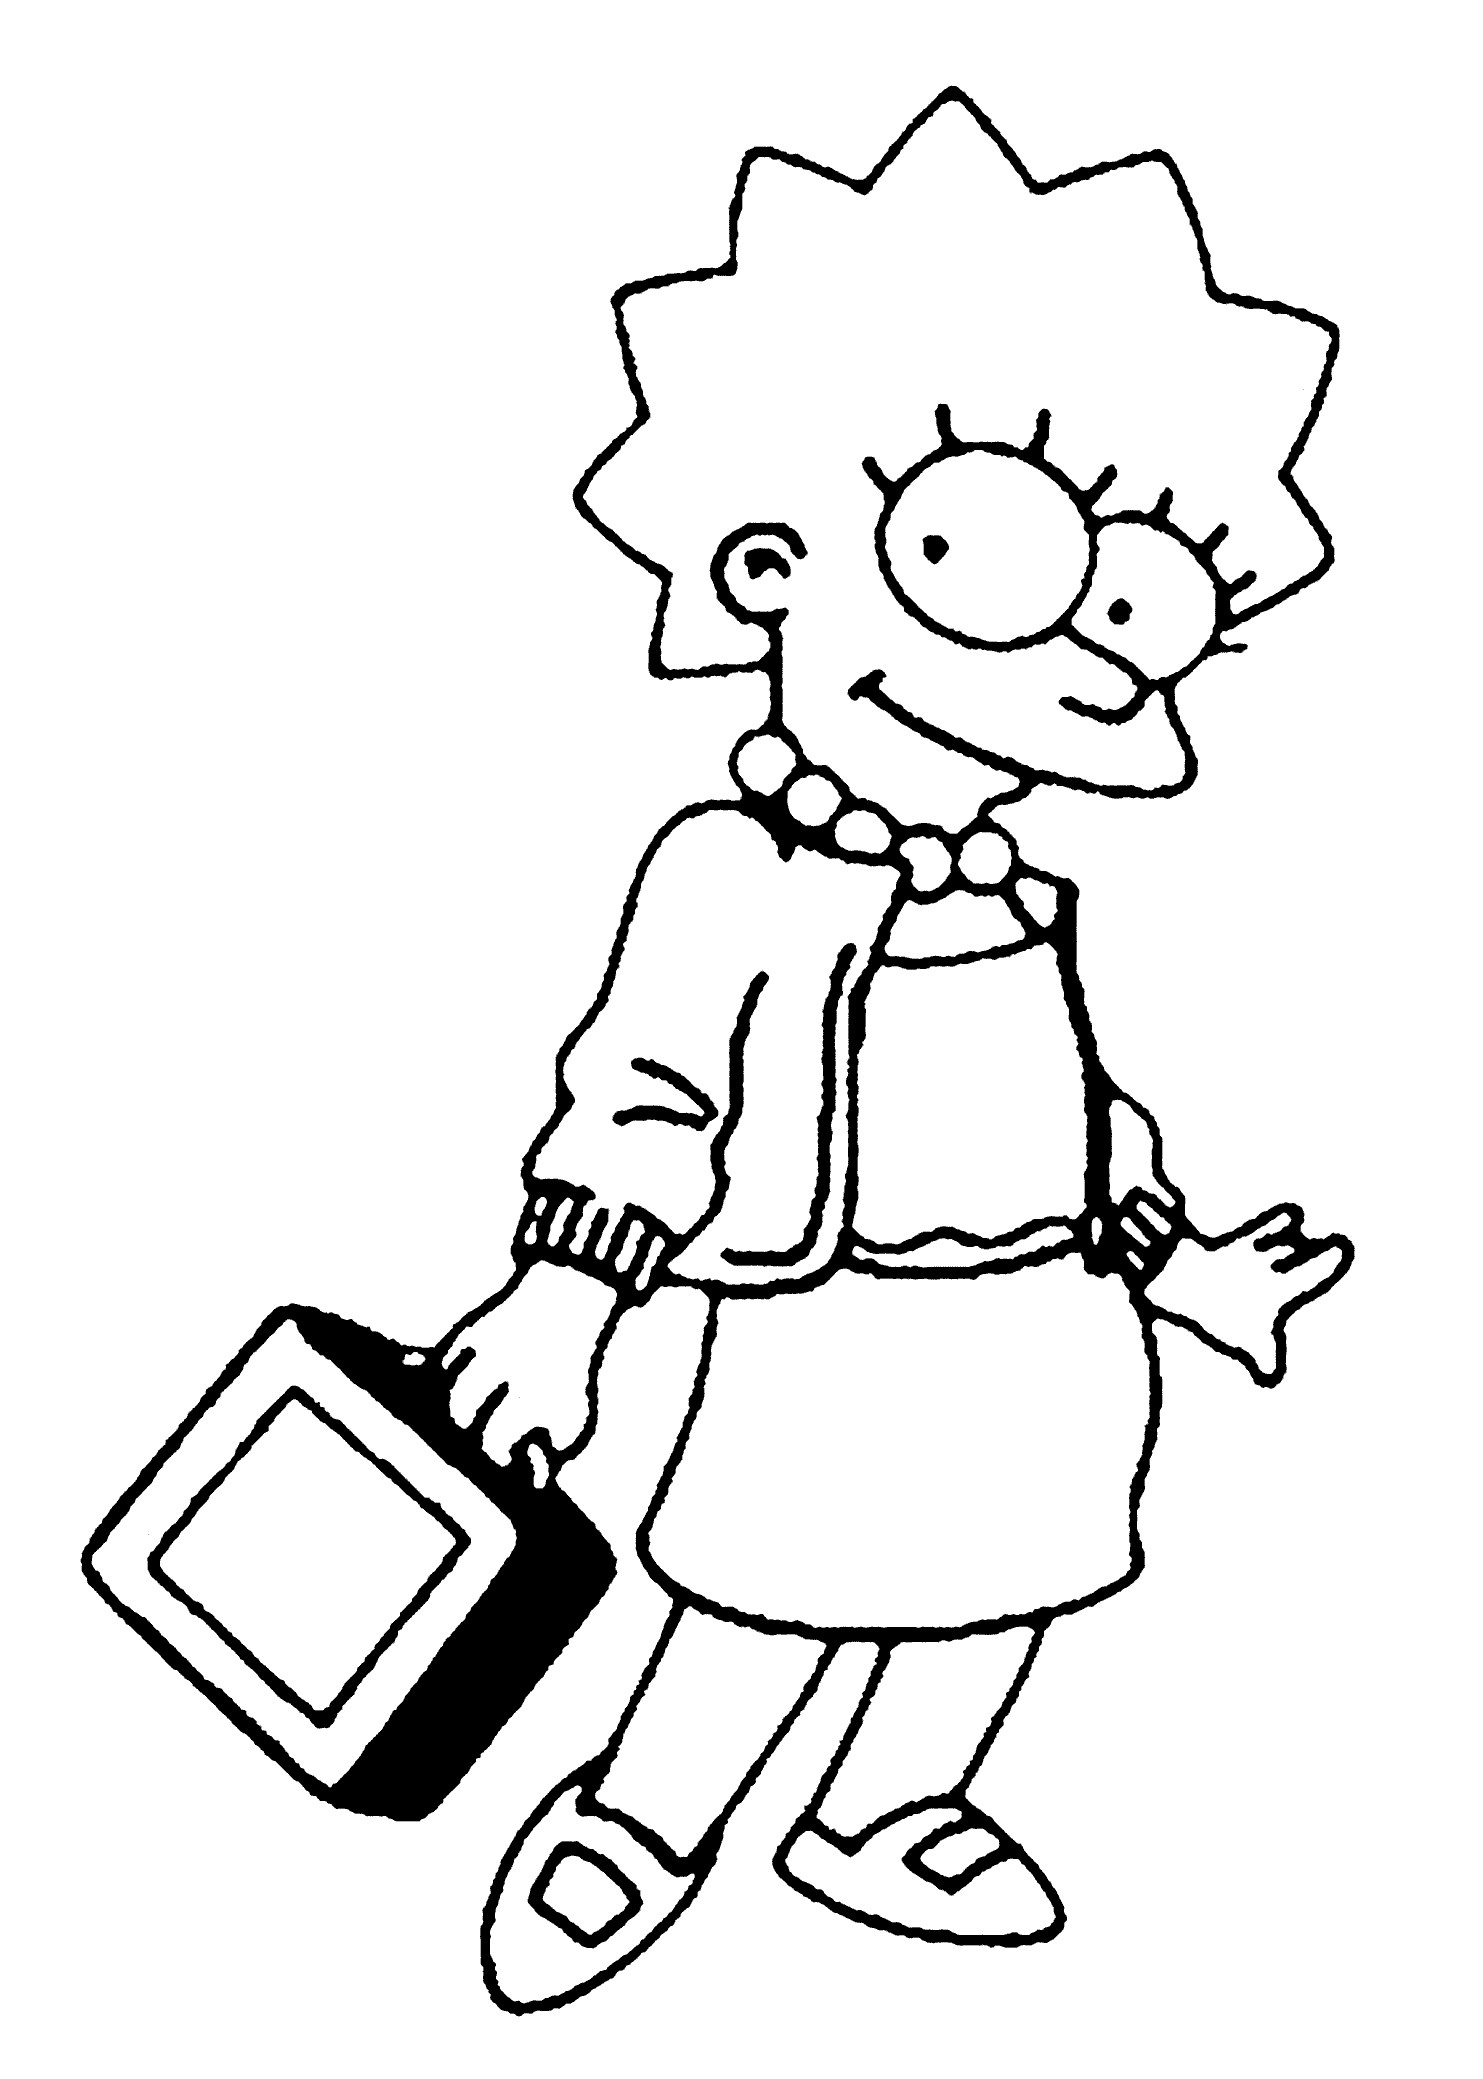 Lisa Simpson coloring page